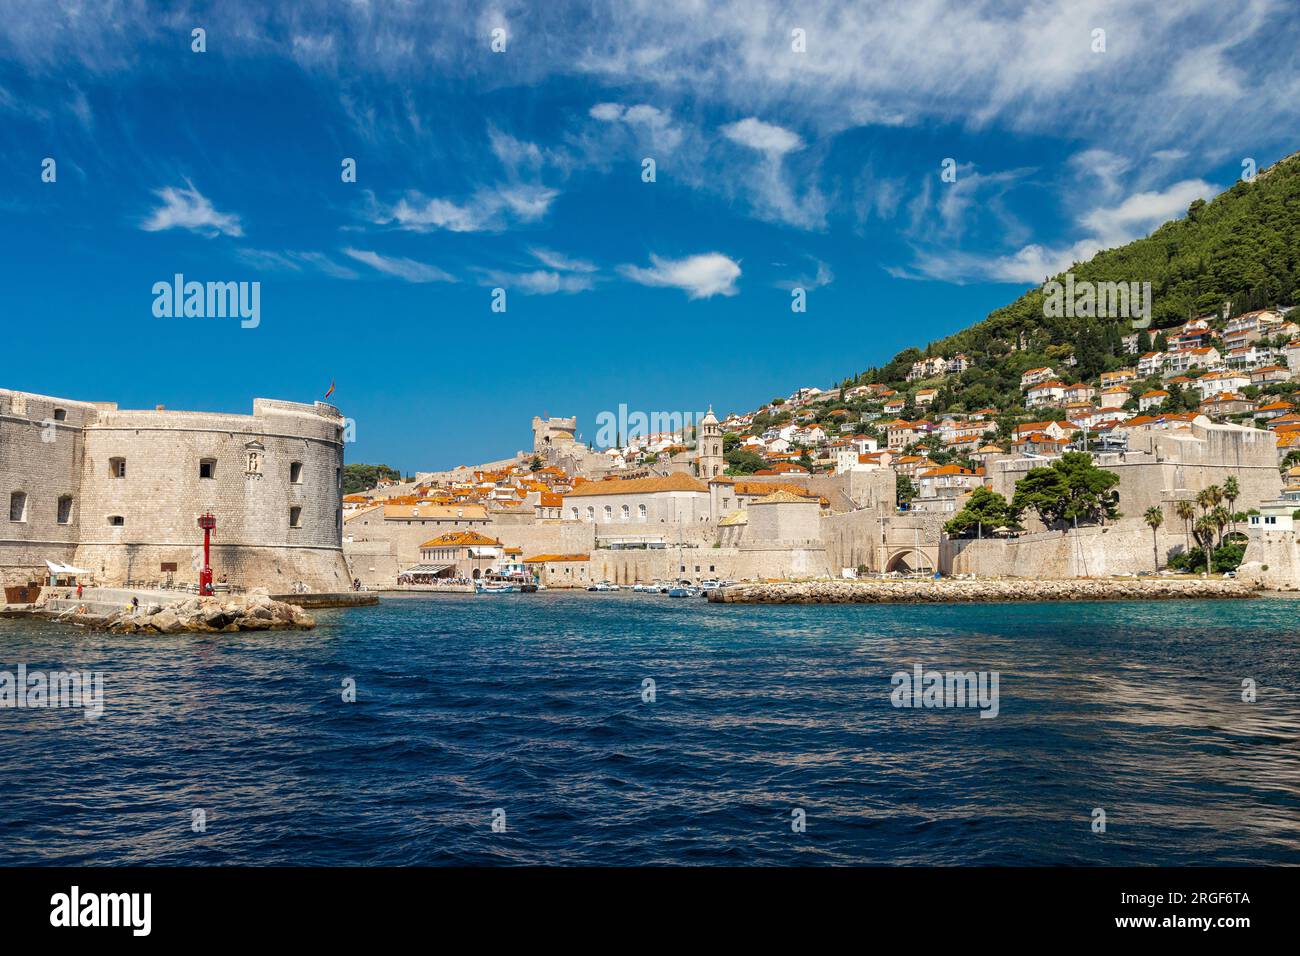 UNCESO world heritage old town of Dubrovnik with fortified walls with spectacular views from the walls over the old town, the narrow streets and the A Stock Photo